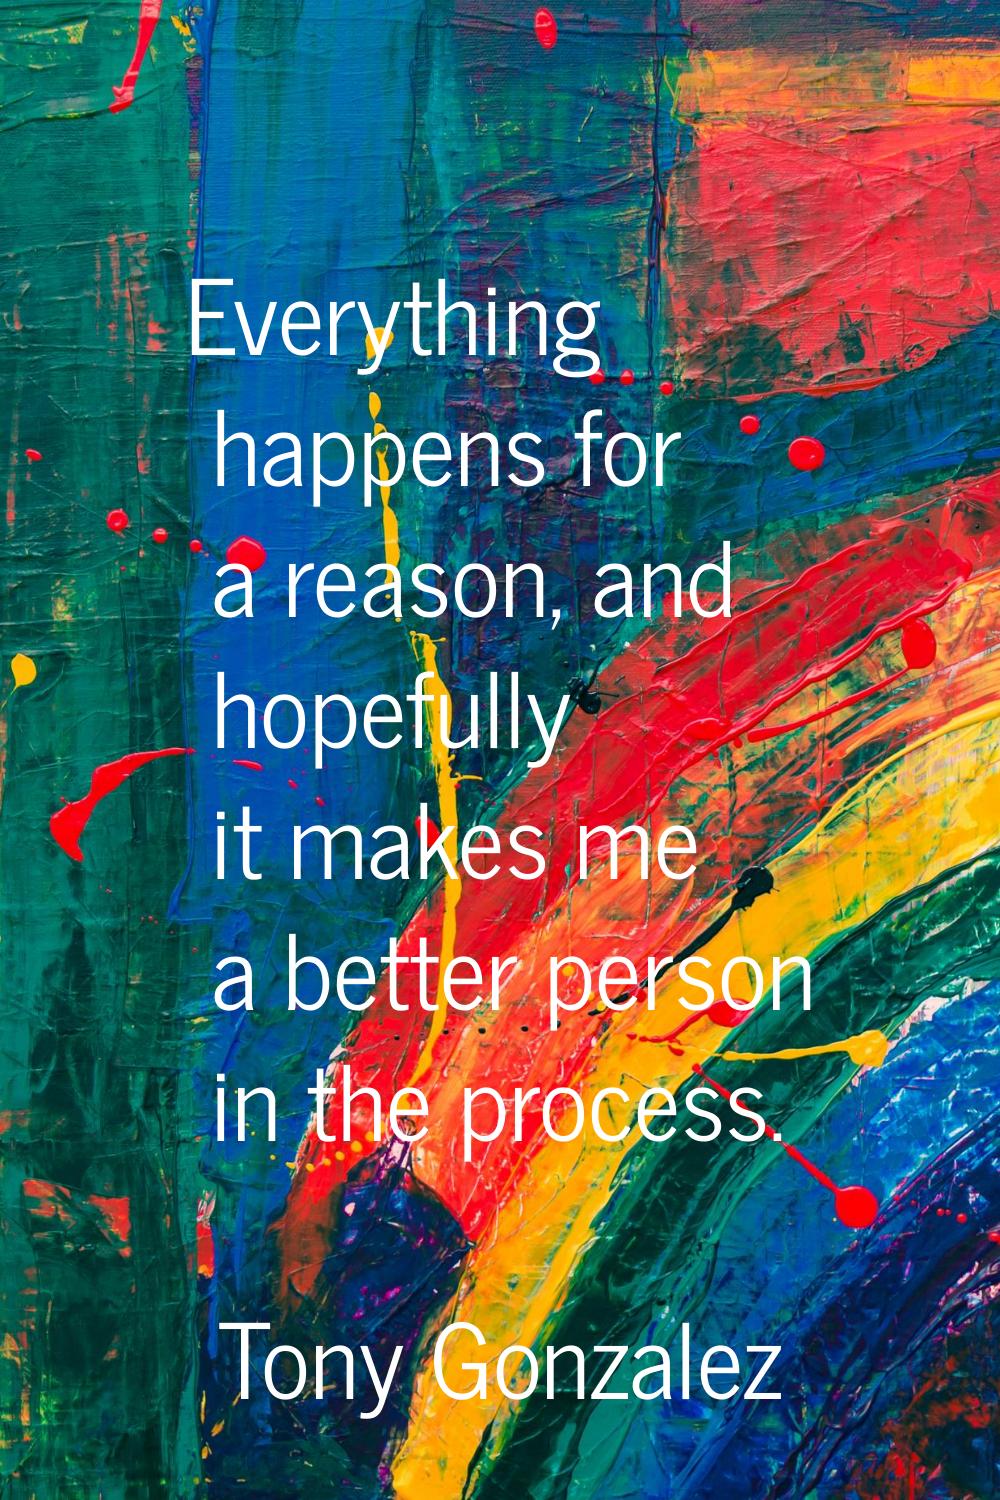 Everything happens for a reason, and hopefully it makes me a better person in the process.